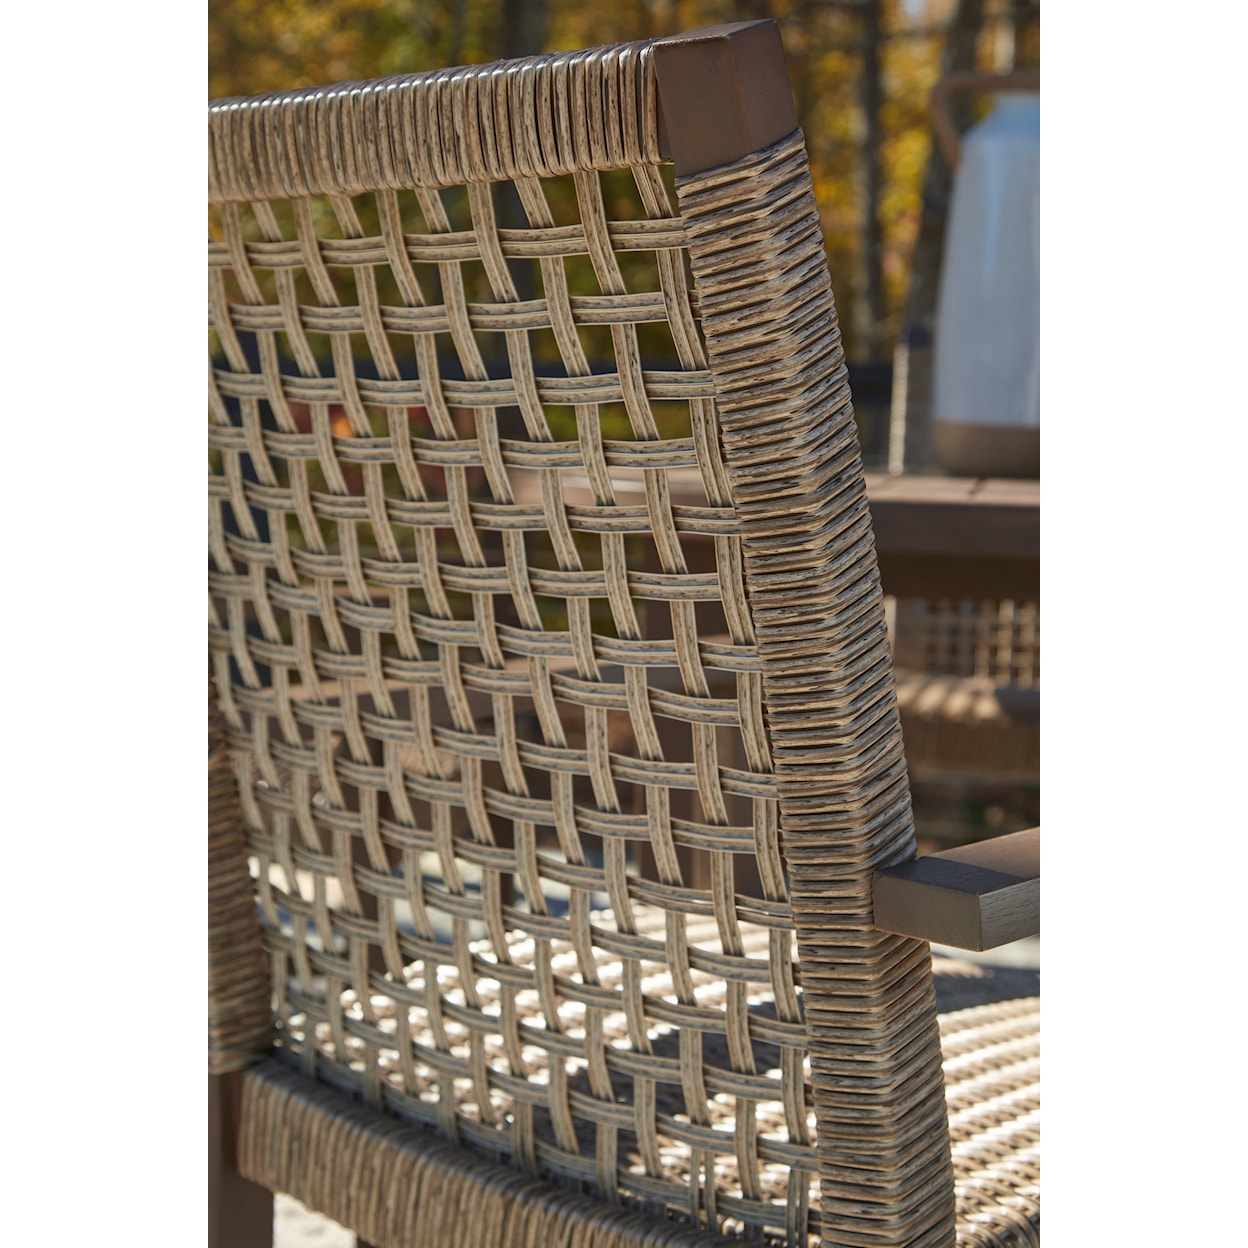 Signature Design by Ashley Germalia Resin Wicker/Wood Outdoor Dining Arm Chair